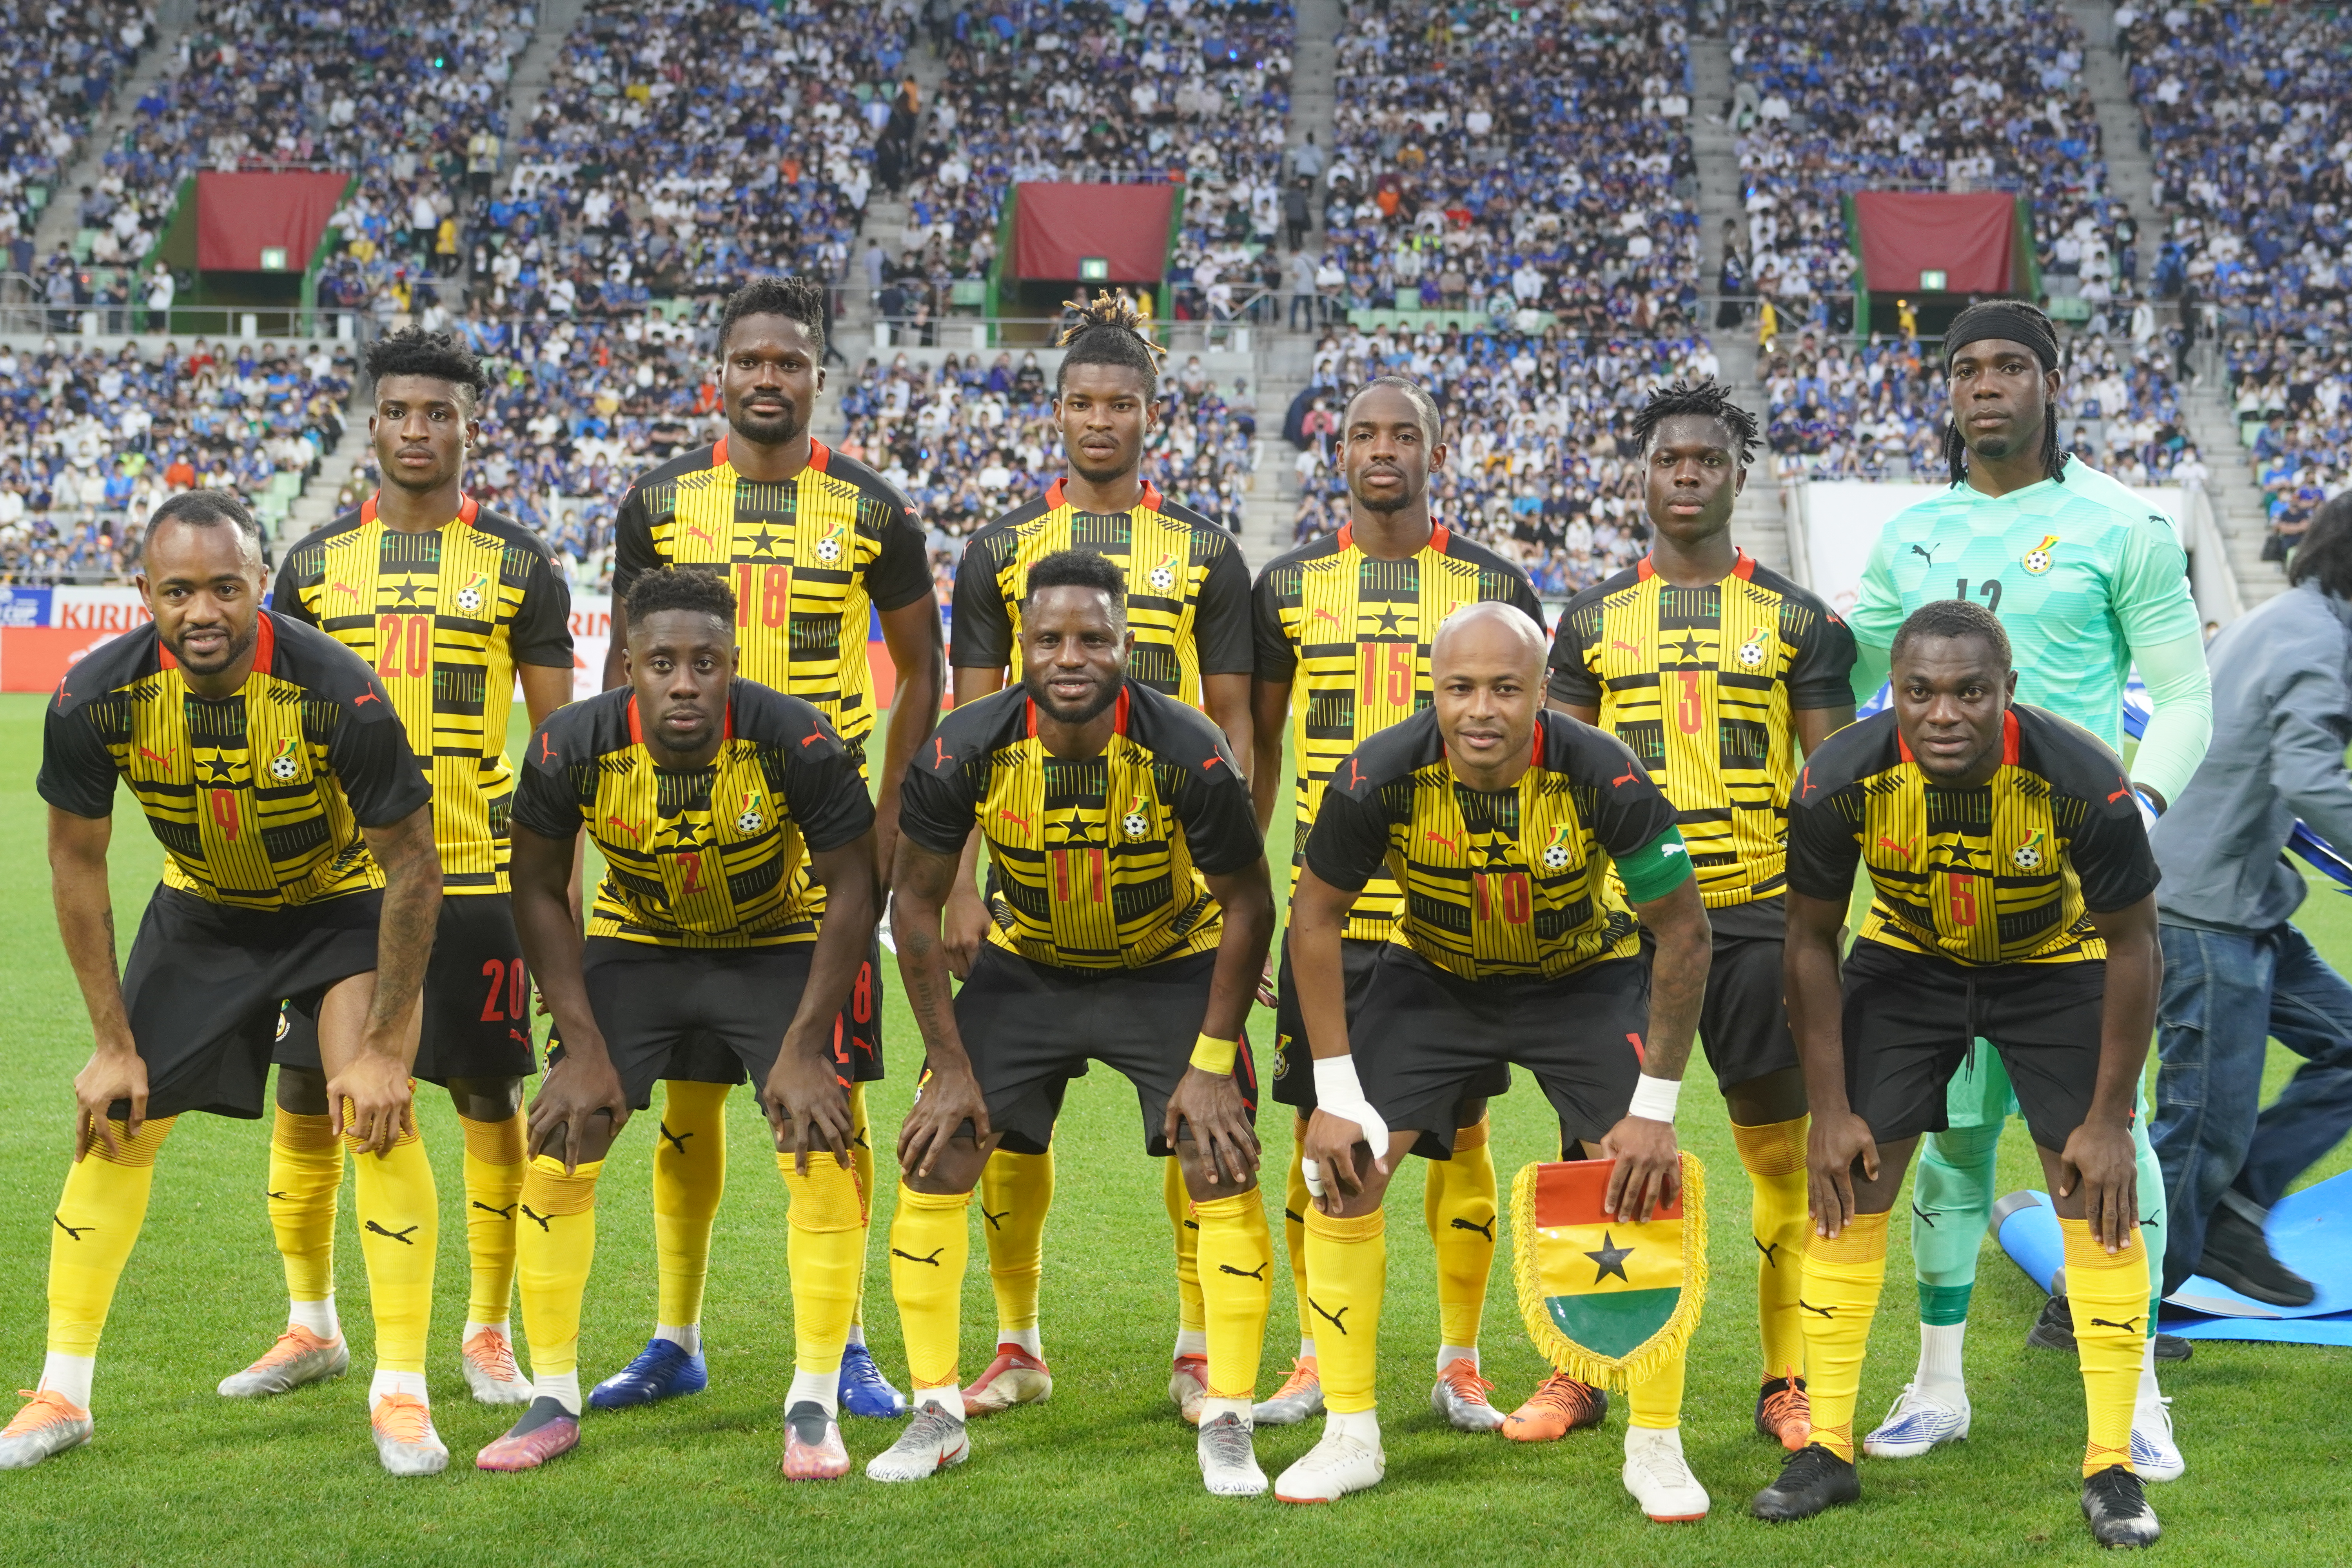 Brazil and Ghana face off in Le Havre – France